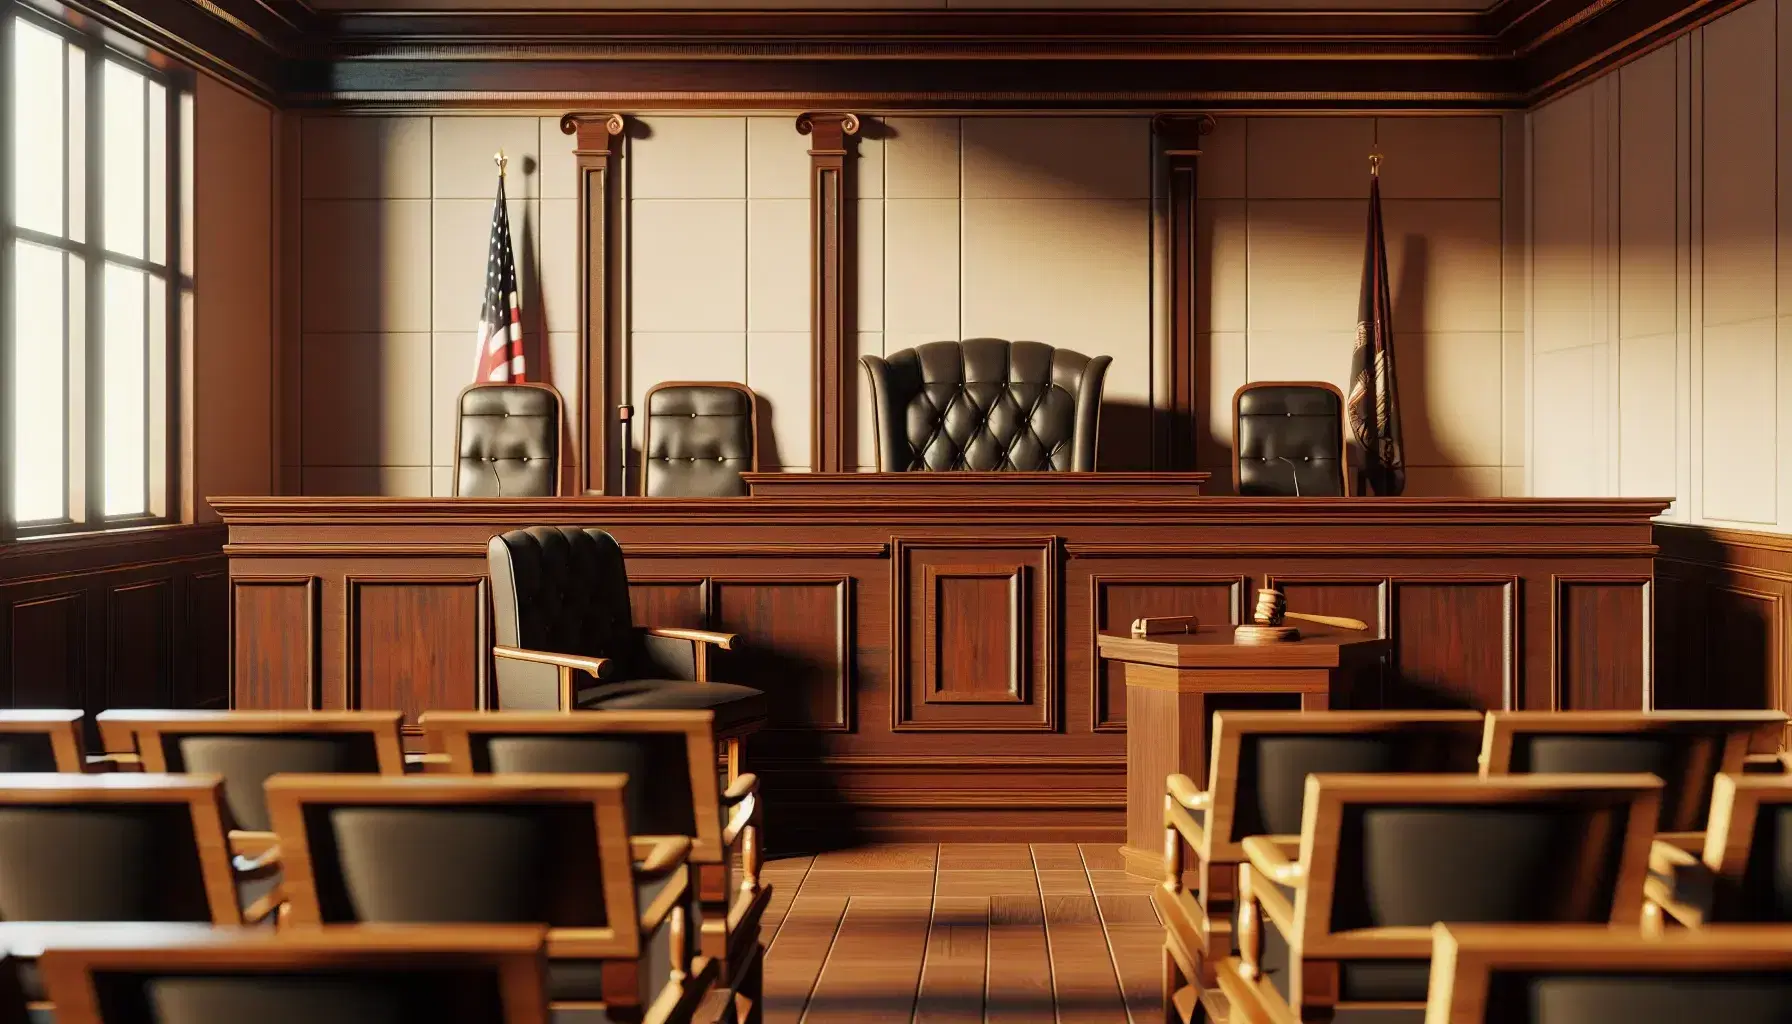 Traditional courtroom with dark wooden judge's bench, witness seat, jury of twelve chairs and two flags in the background.